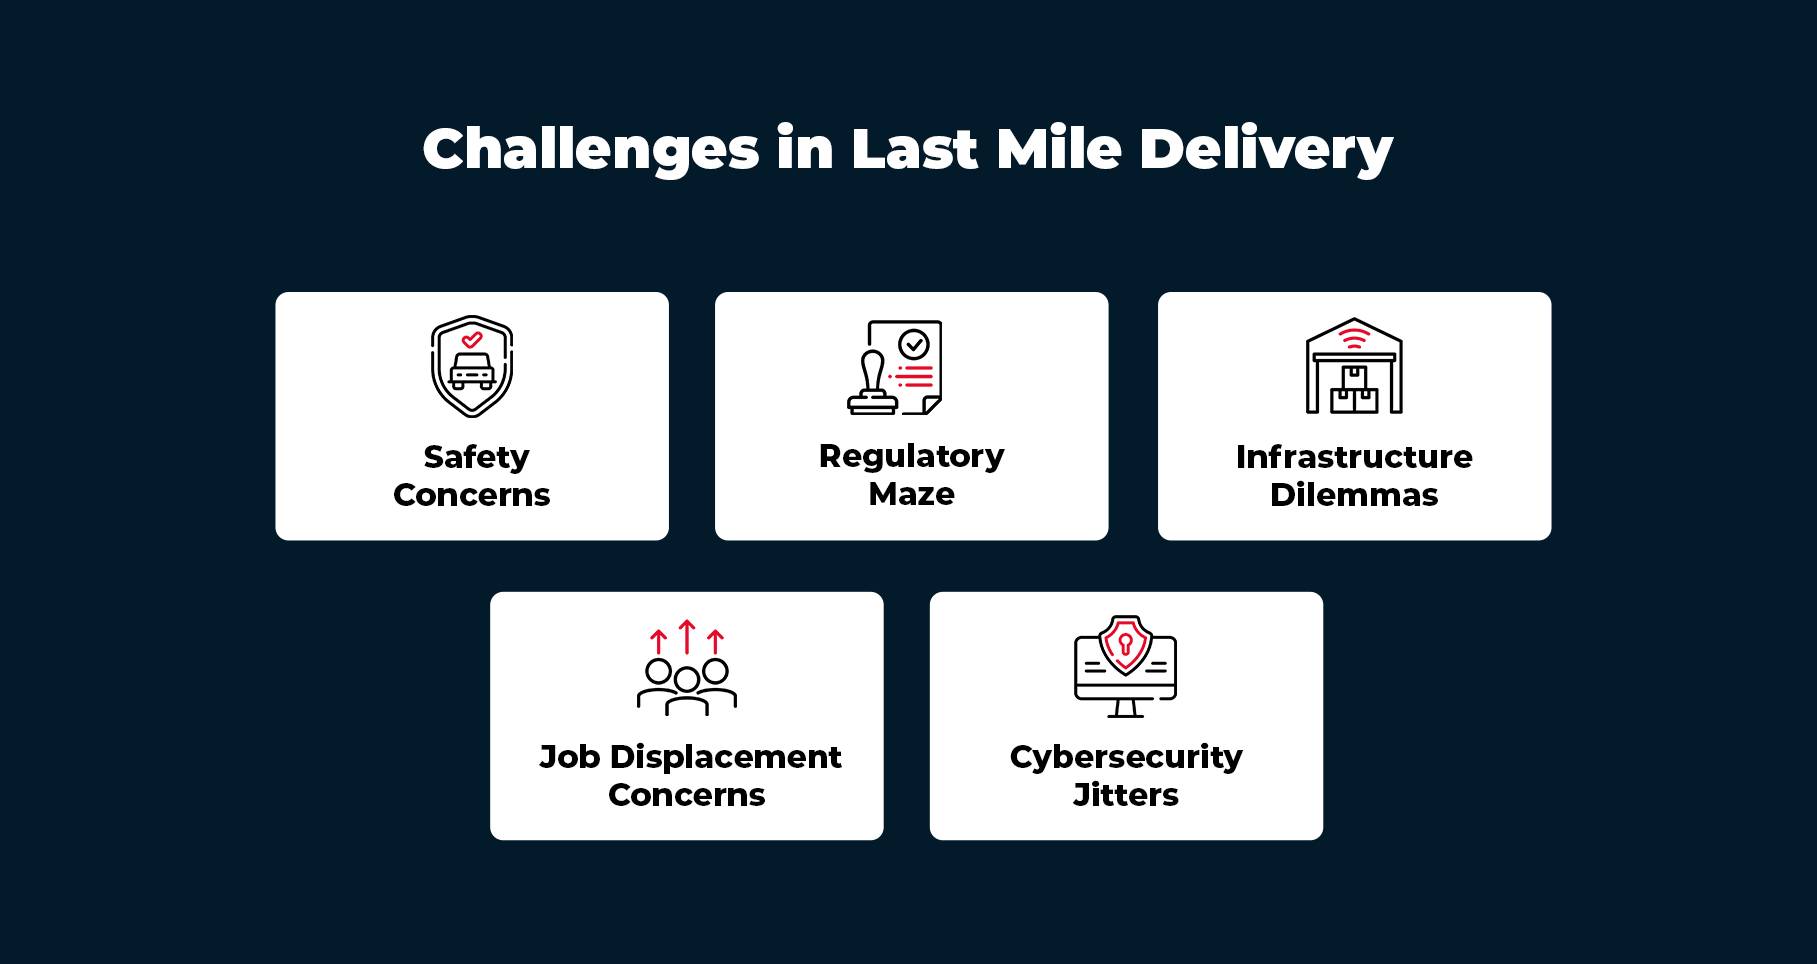 Challenges in last mile delivery in urban retail